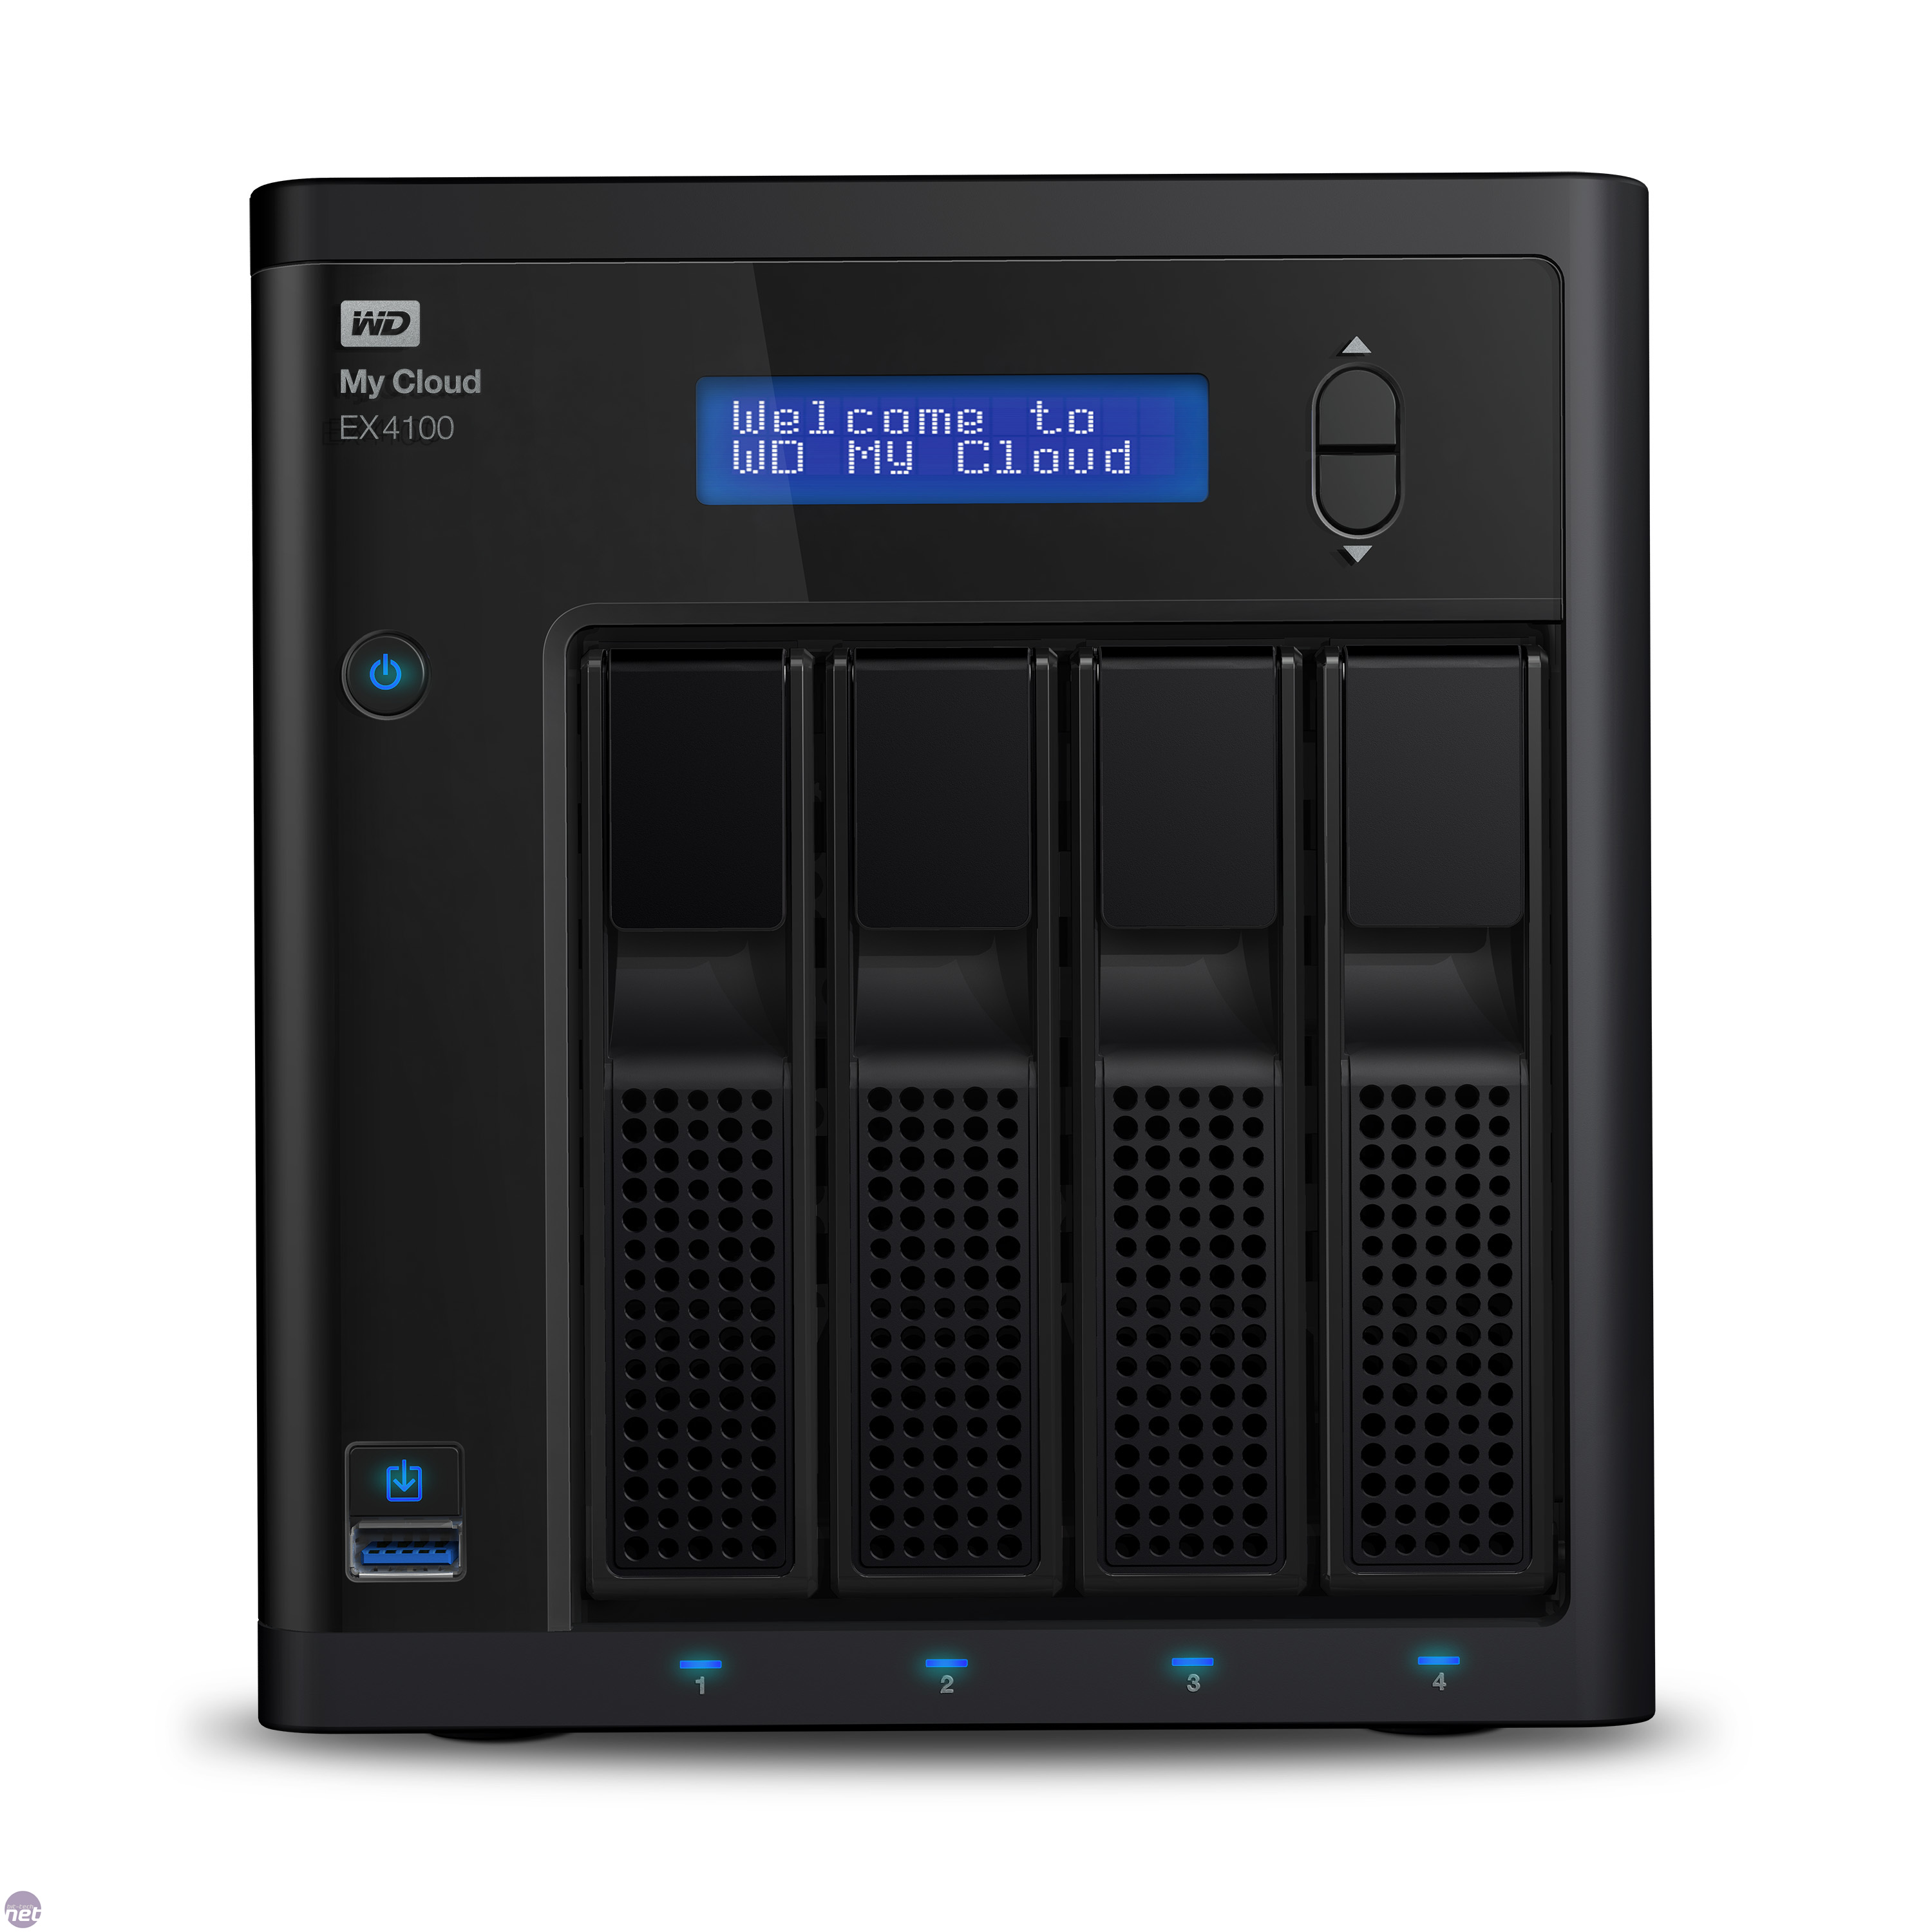 WD launches four new My Cloud NAS boxes